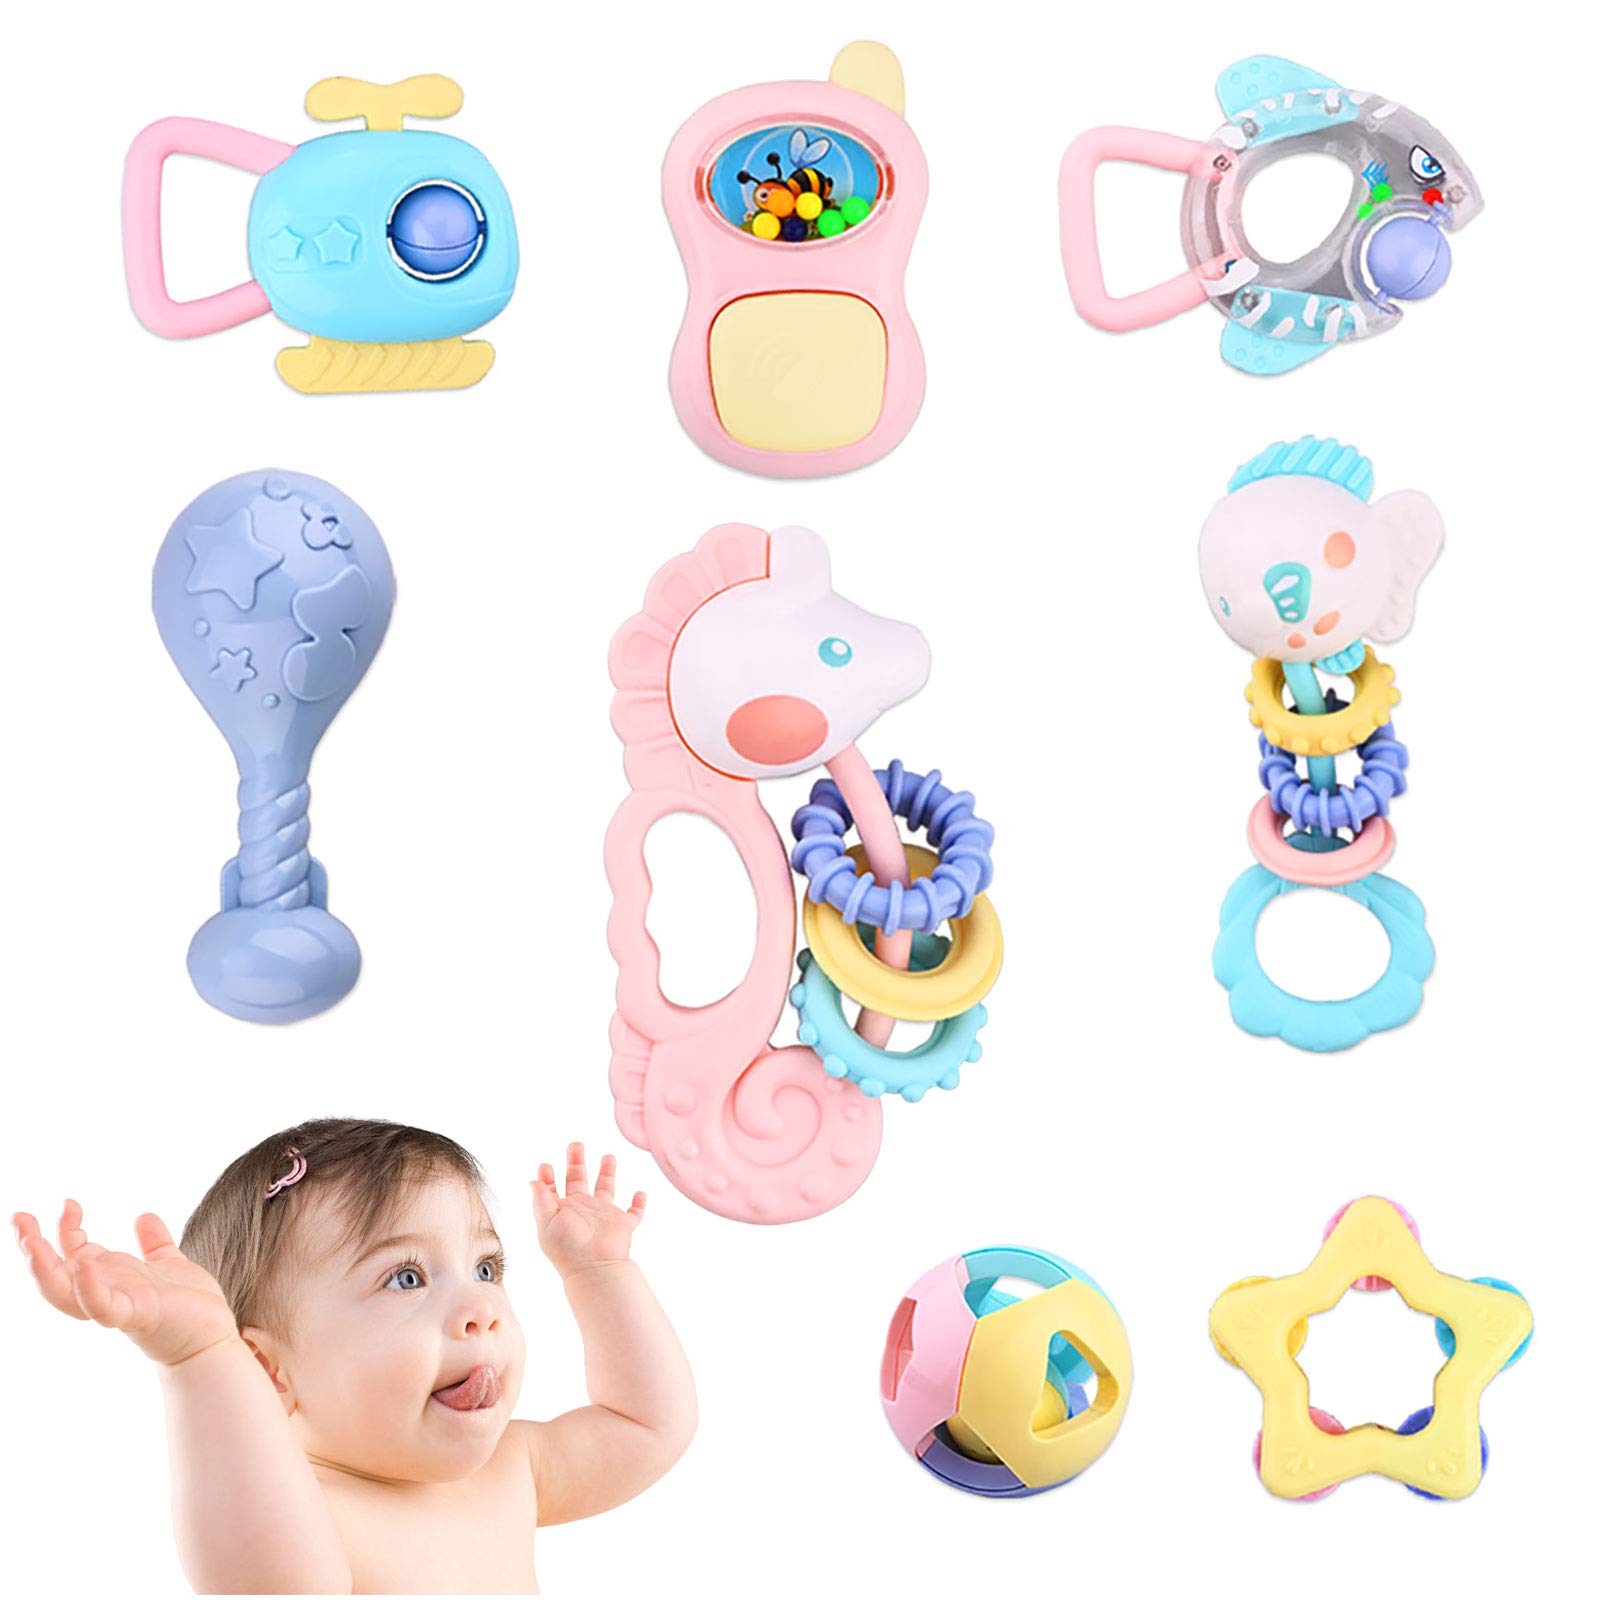 Newborn Infant Baby Rattles Silicone Teether Toys 8pcs -Grab and Spin Educational Baby Toys 0 3 6 9 12months Featured Image